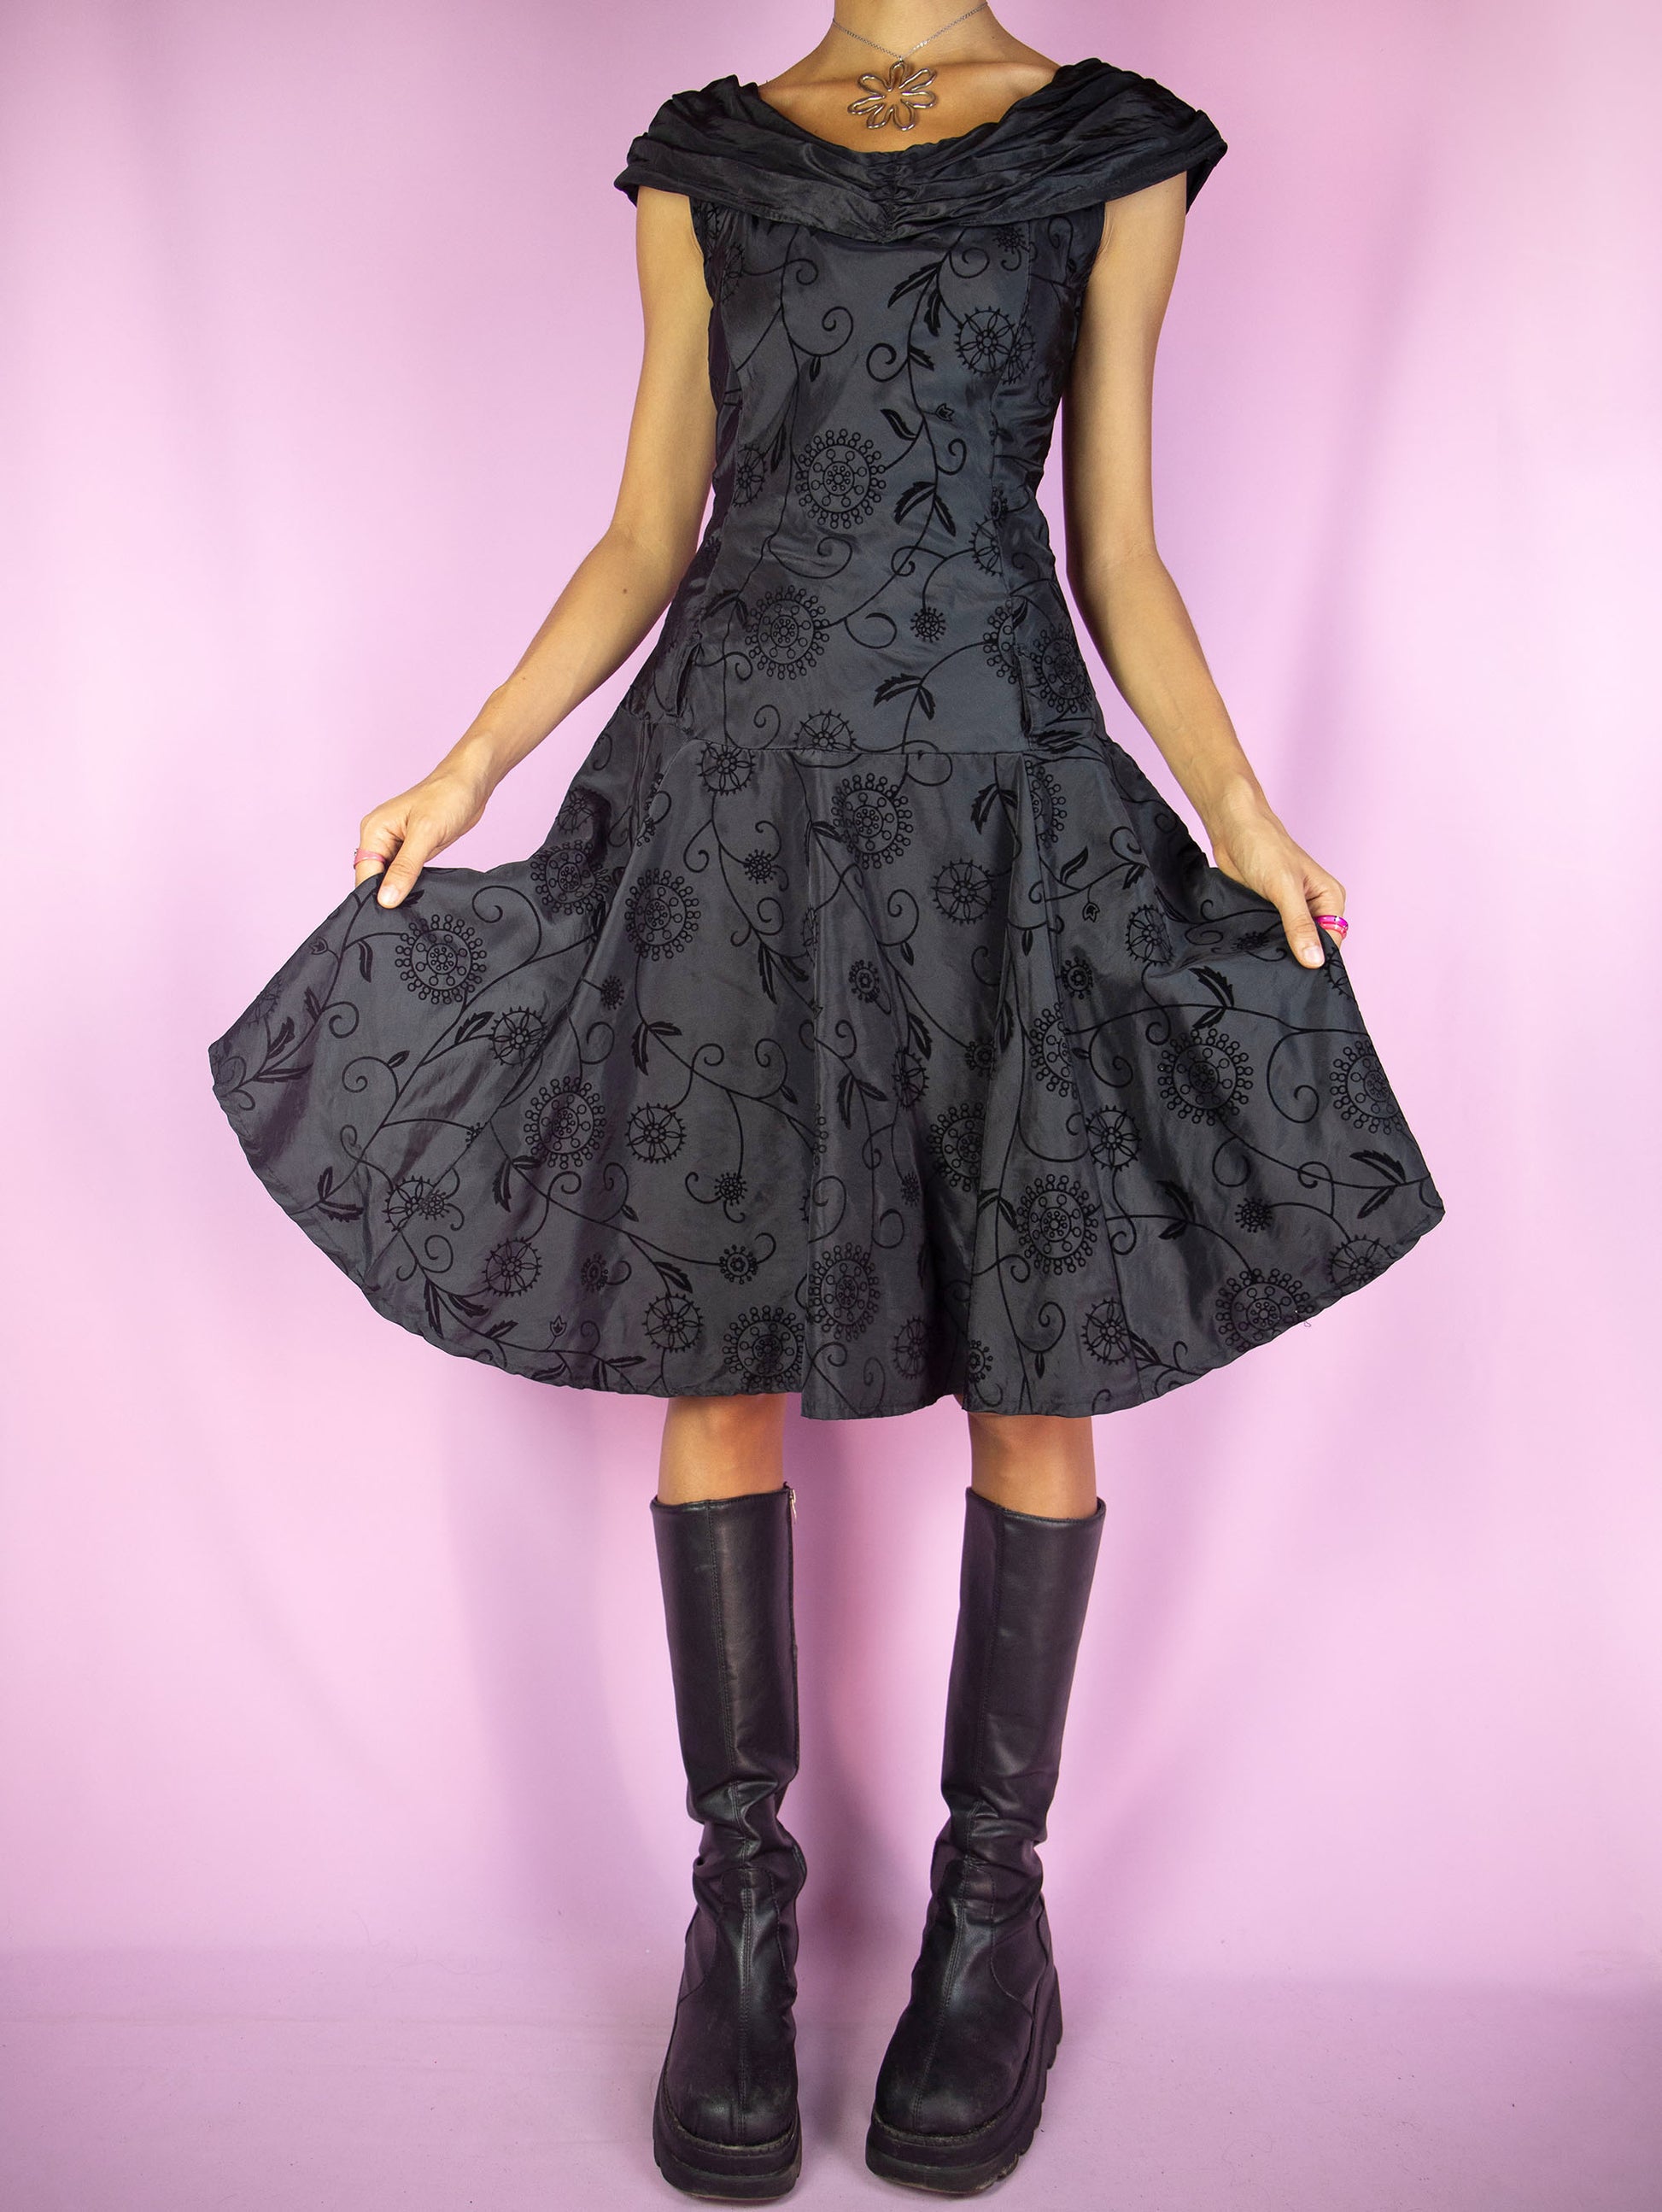 The Vintage 90s Black Flare Midi Dress is a black sleeveless flared dress with floral velvet details and side zipper closure. Fairy grunge whimsygoth 1990S party night dress.